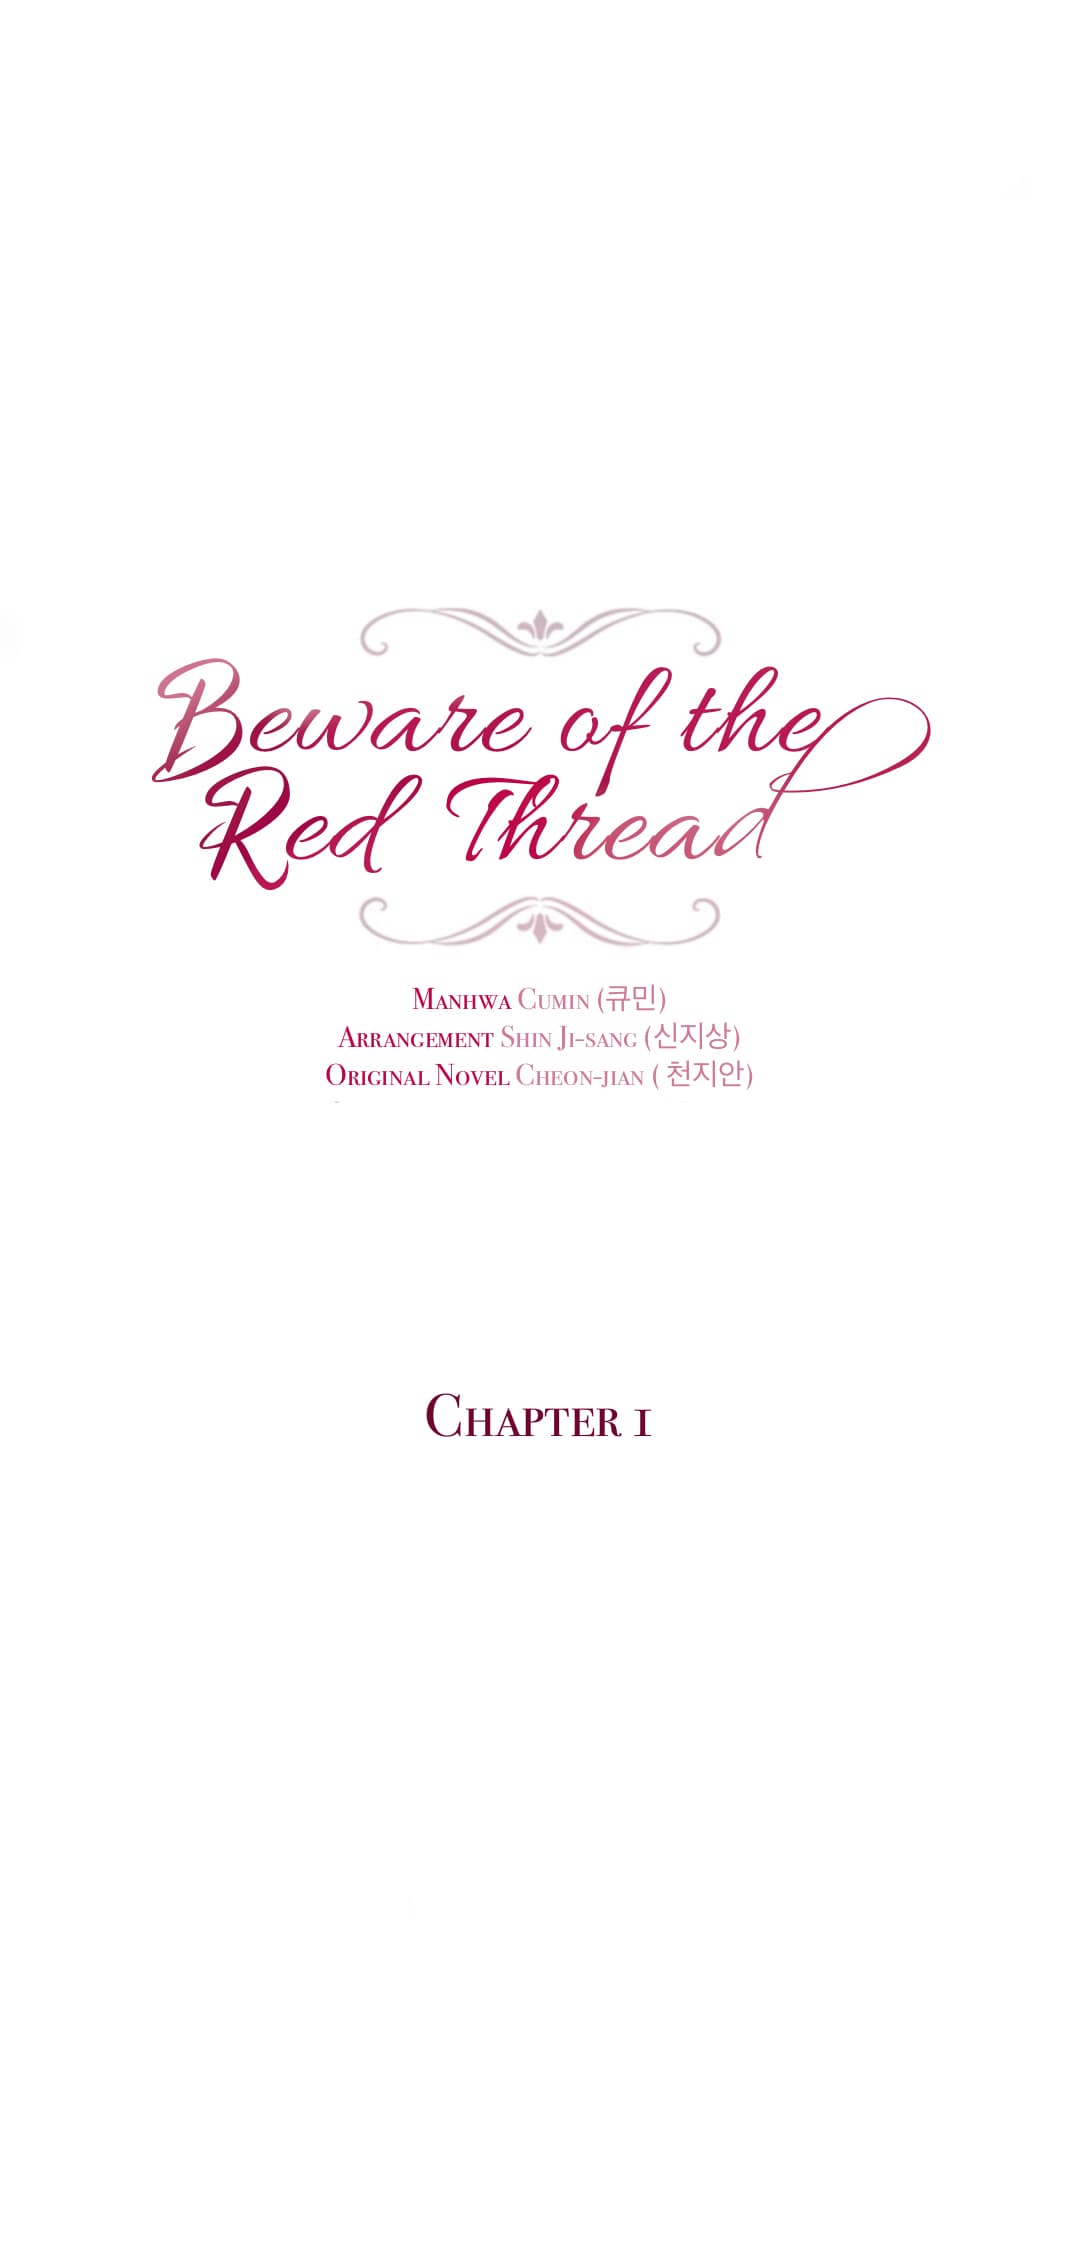 Beware of the Red Thread1 02